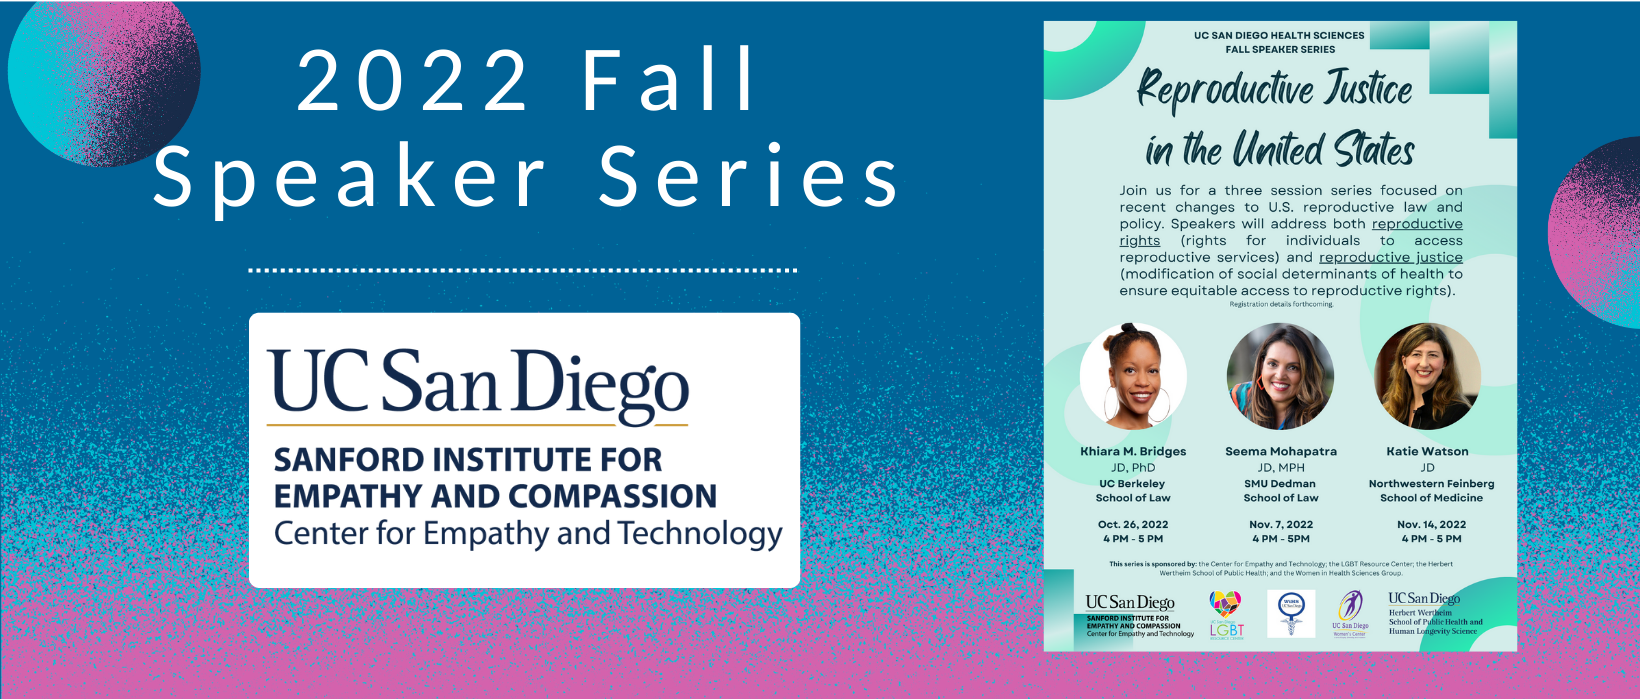 5 of 6, The UC San Diego Center for Empathy and Compassion logo appears blow the words 2022 Fall Speaker Series. To the right is a picture of the recruitment flyer for the series, showing all three series speakers: Khiara M. Bridges, Seema Mohapatra, and Katie Watson. The series is titled Reproductive Justice in the United States and states "Join us for a three session series focused on recent changes to U.S. reproductive law and policy. Speakers will address both reproductive rights (rights for individuals to access reproductive services) and reproductive justice (modification of social determinants of health to ensure equitable access to reproductive rights). 